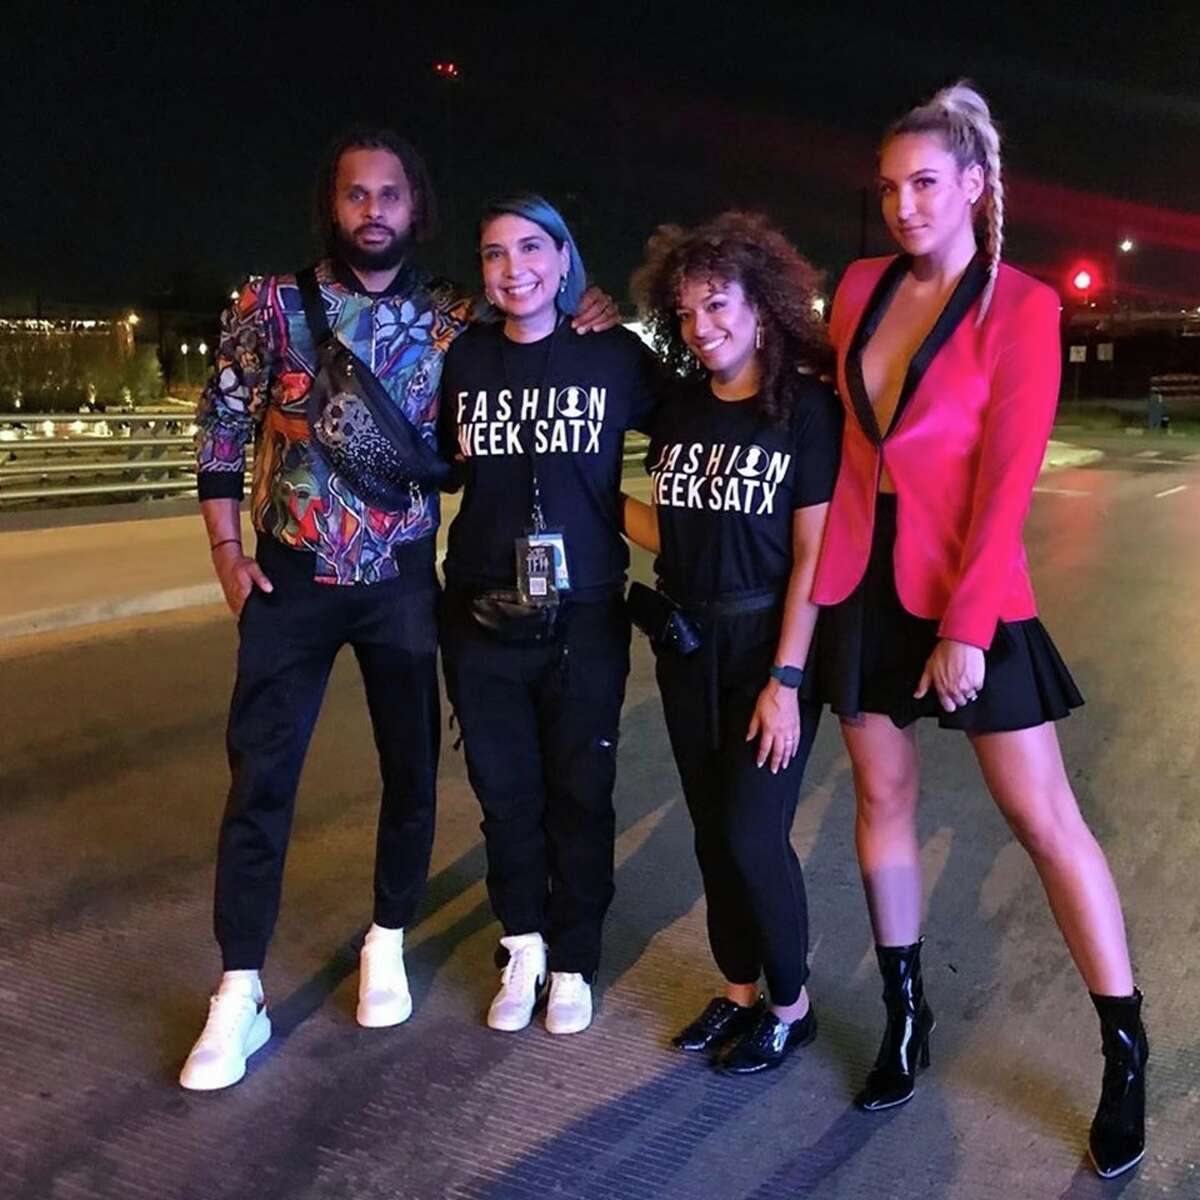 Patty Mills and new wife Alyssa MIlls were in attendance at Celebrate San Antonio, the third event in the local fashion week schedule. The pair posed for a photo with Fashion Week SATX Founder Burgundy Woods and Jeanelly Concepcion during the San Pedro Creek Culture Park event.